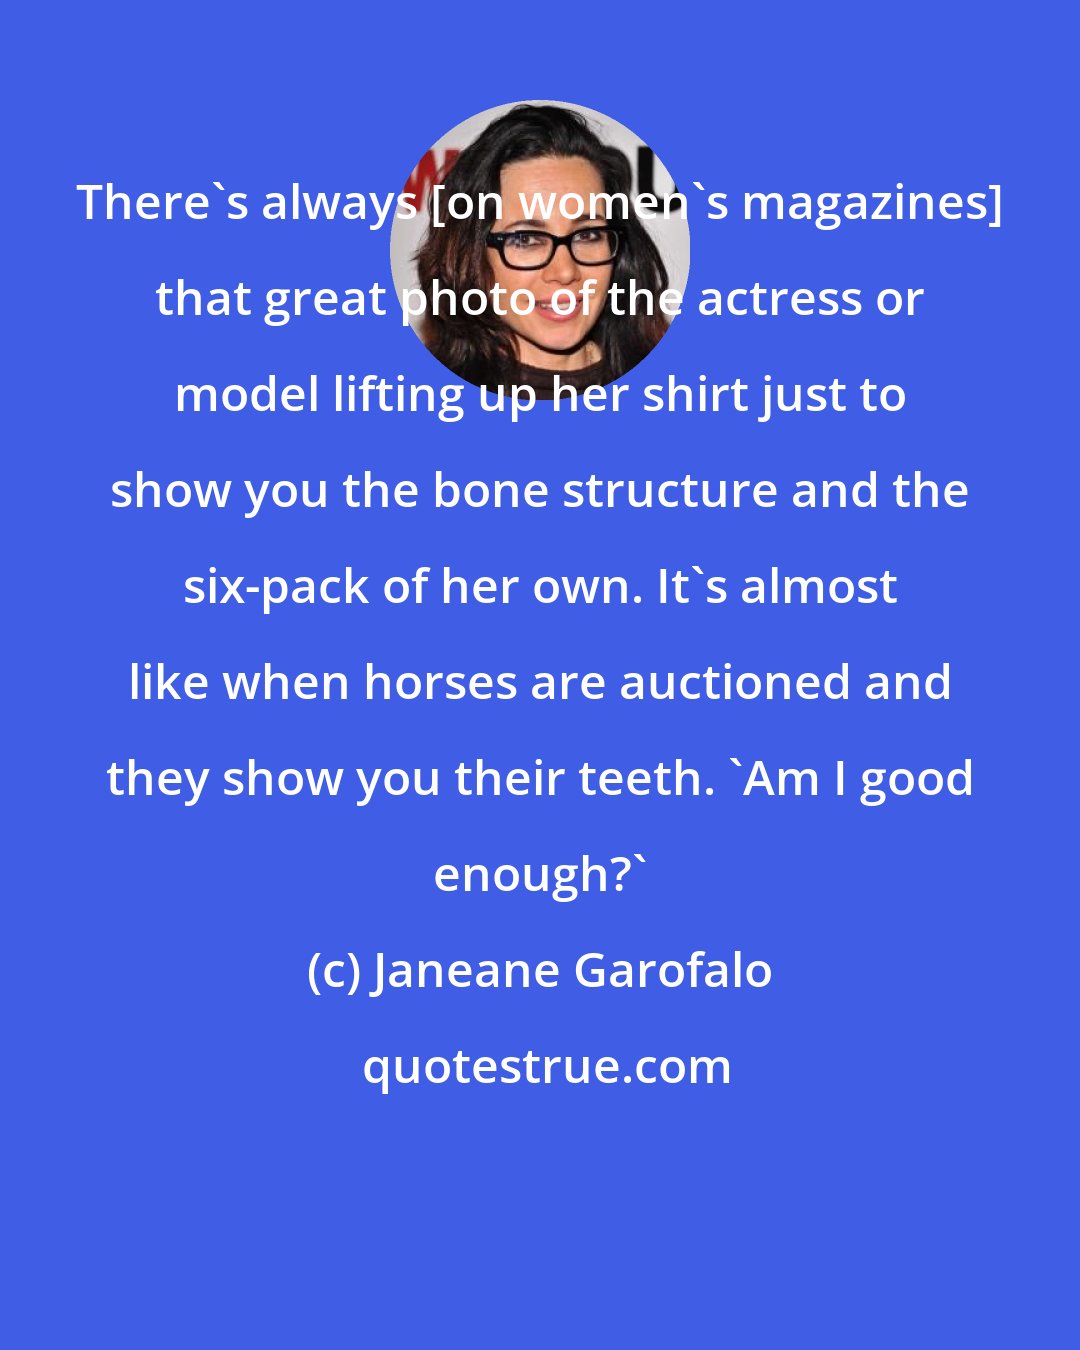 Janeane Garofalo: There's always [on women's magazines] that great photo of the actress or model lifting up her shirt just to show you the bone structure and the six-pack of her own. It's almost like when horses are auctioned and they show you their teeth. 'Am I good enough?'